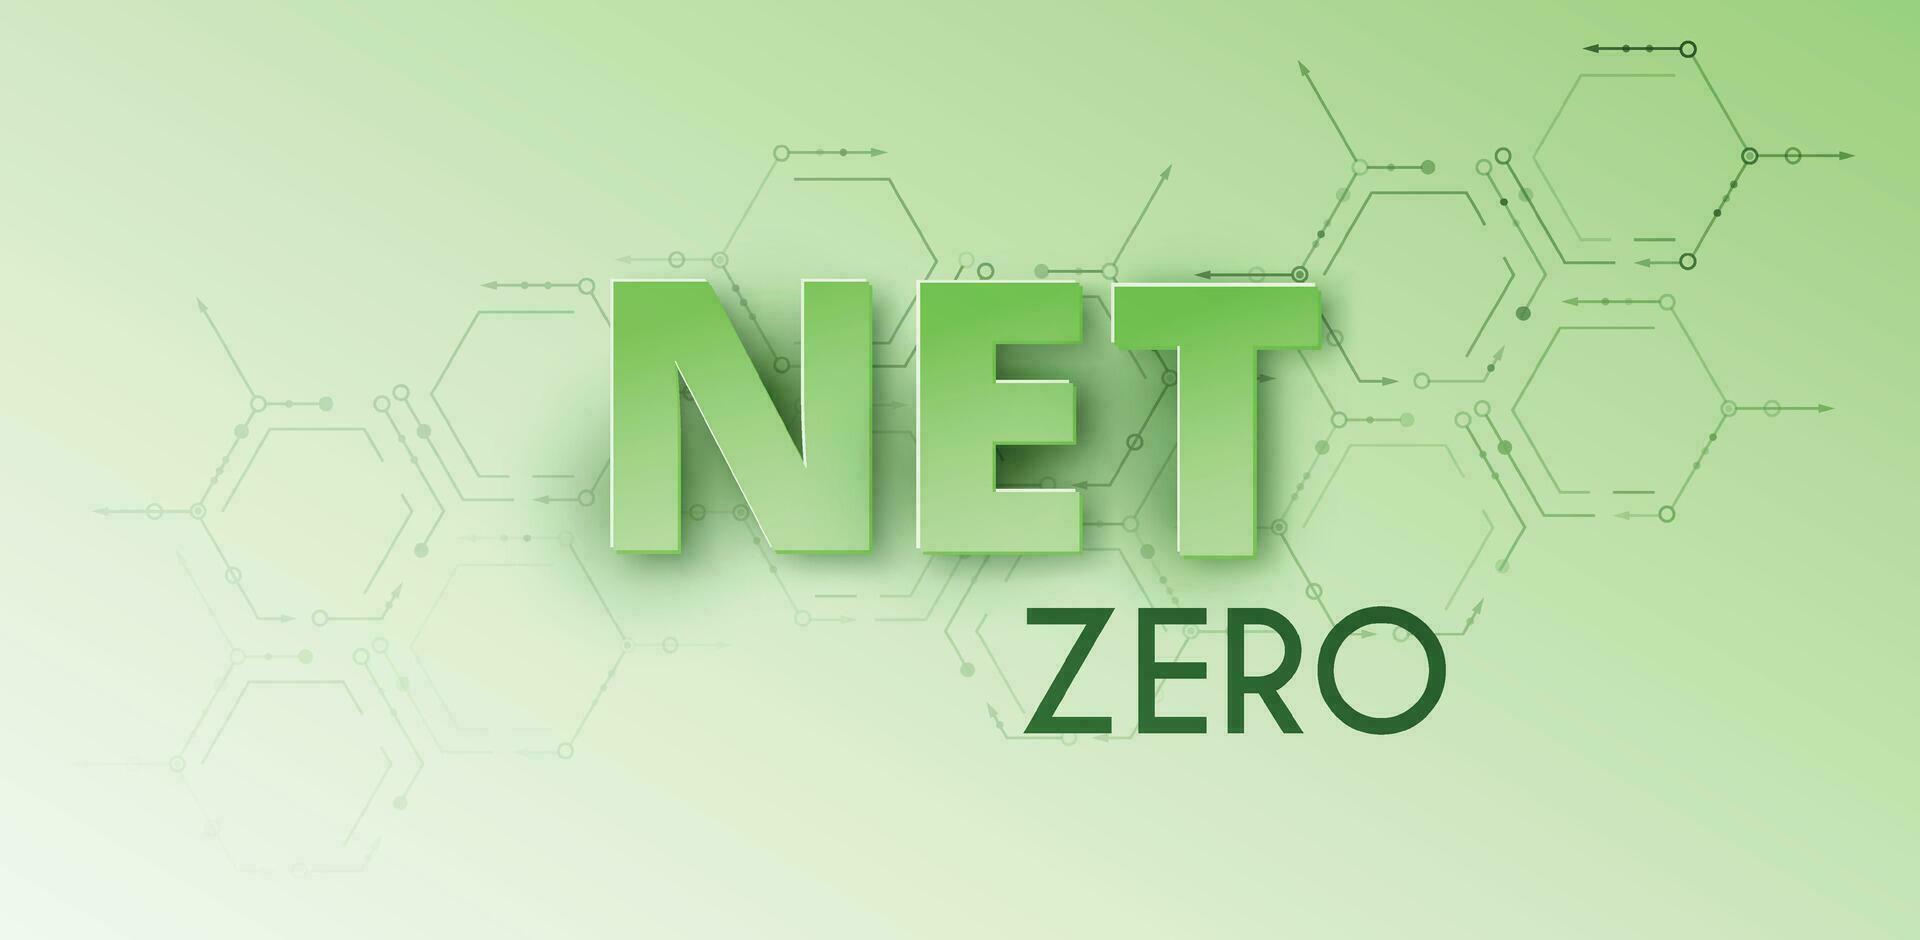 Net Zero emissions banner with hexagons. CO2 neutral. Eco-friendly template. Carbon emissions free. No greenhouse gas emissions. Vector illustration